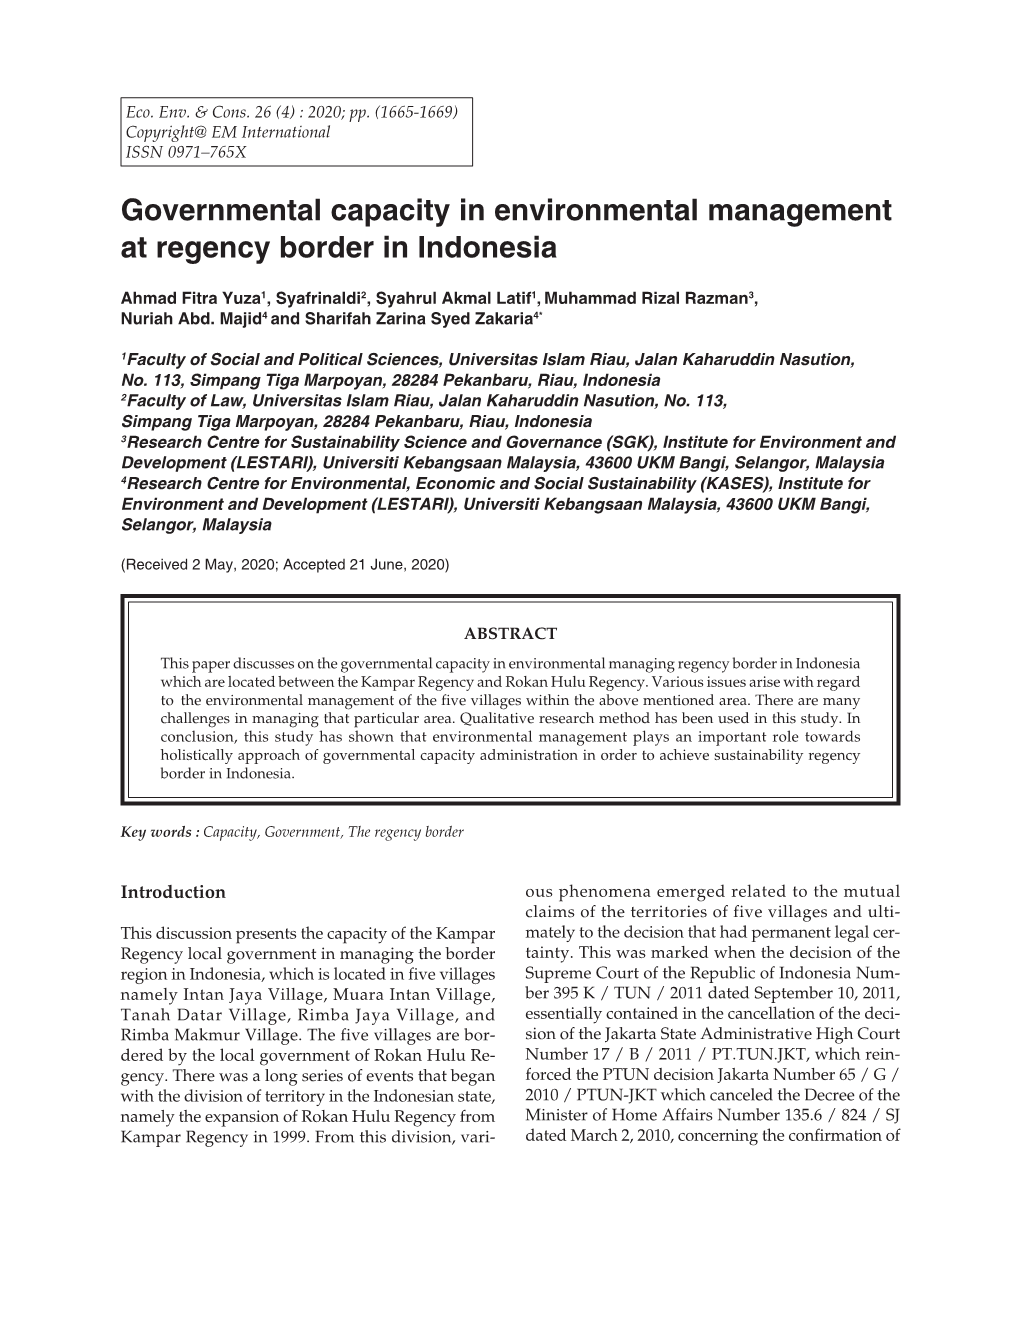 Governmental Capacity in Environmental Management at Regency Border in Indonesia